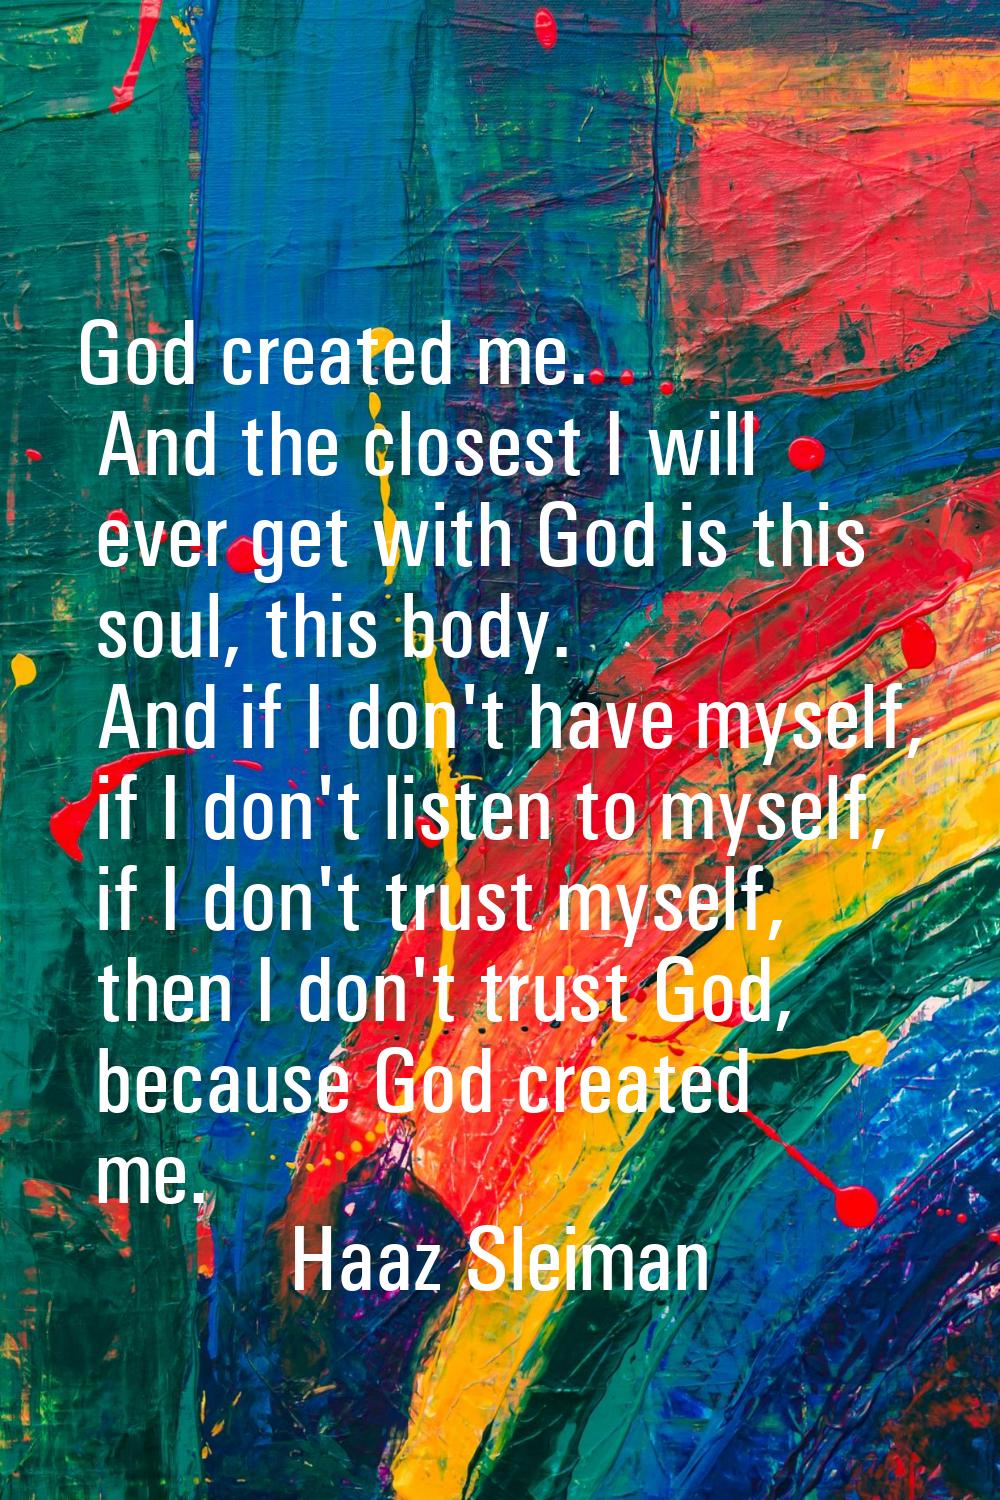 God created me. And the closest I will ever get with God is this soul, this body. And if I don't ha